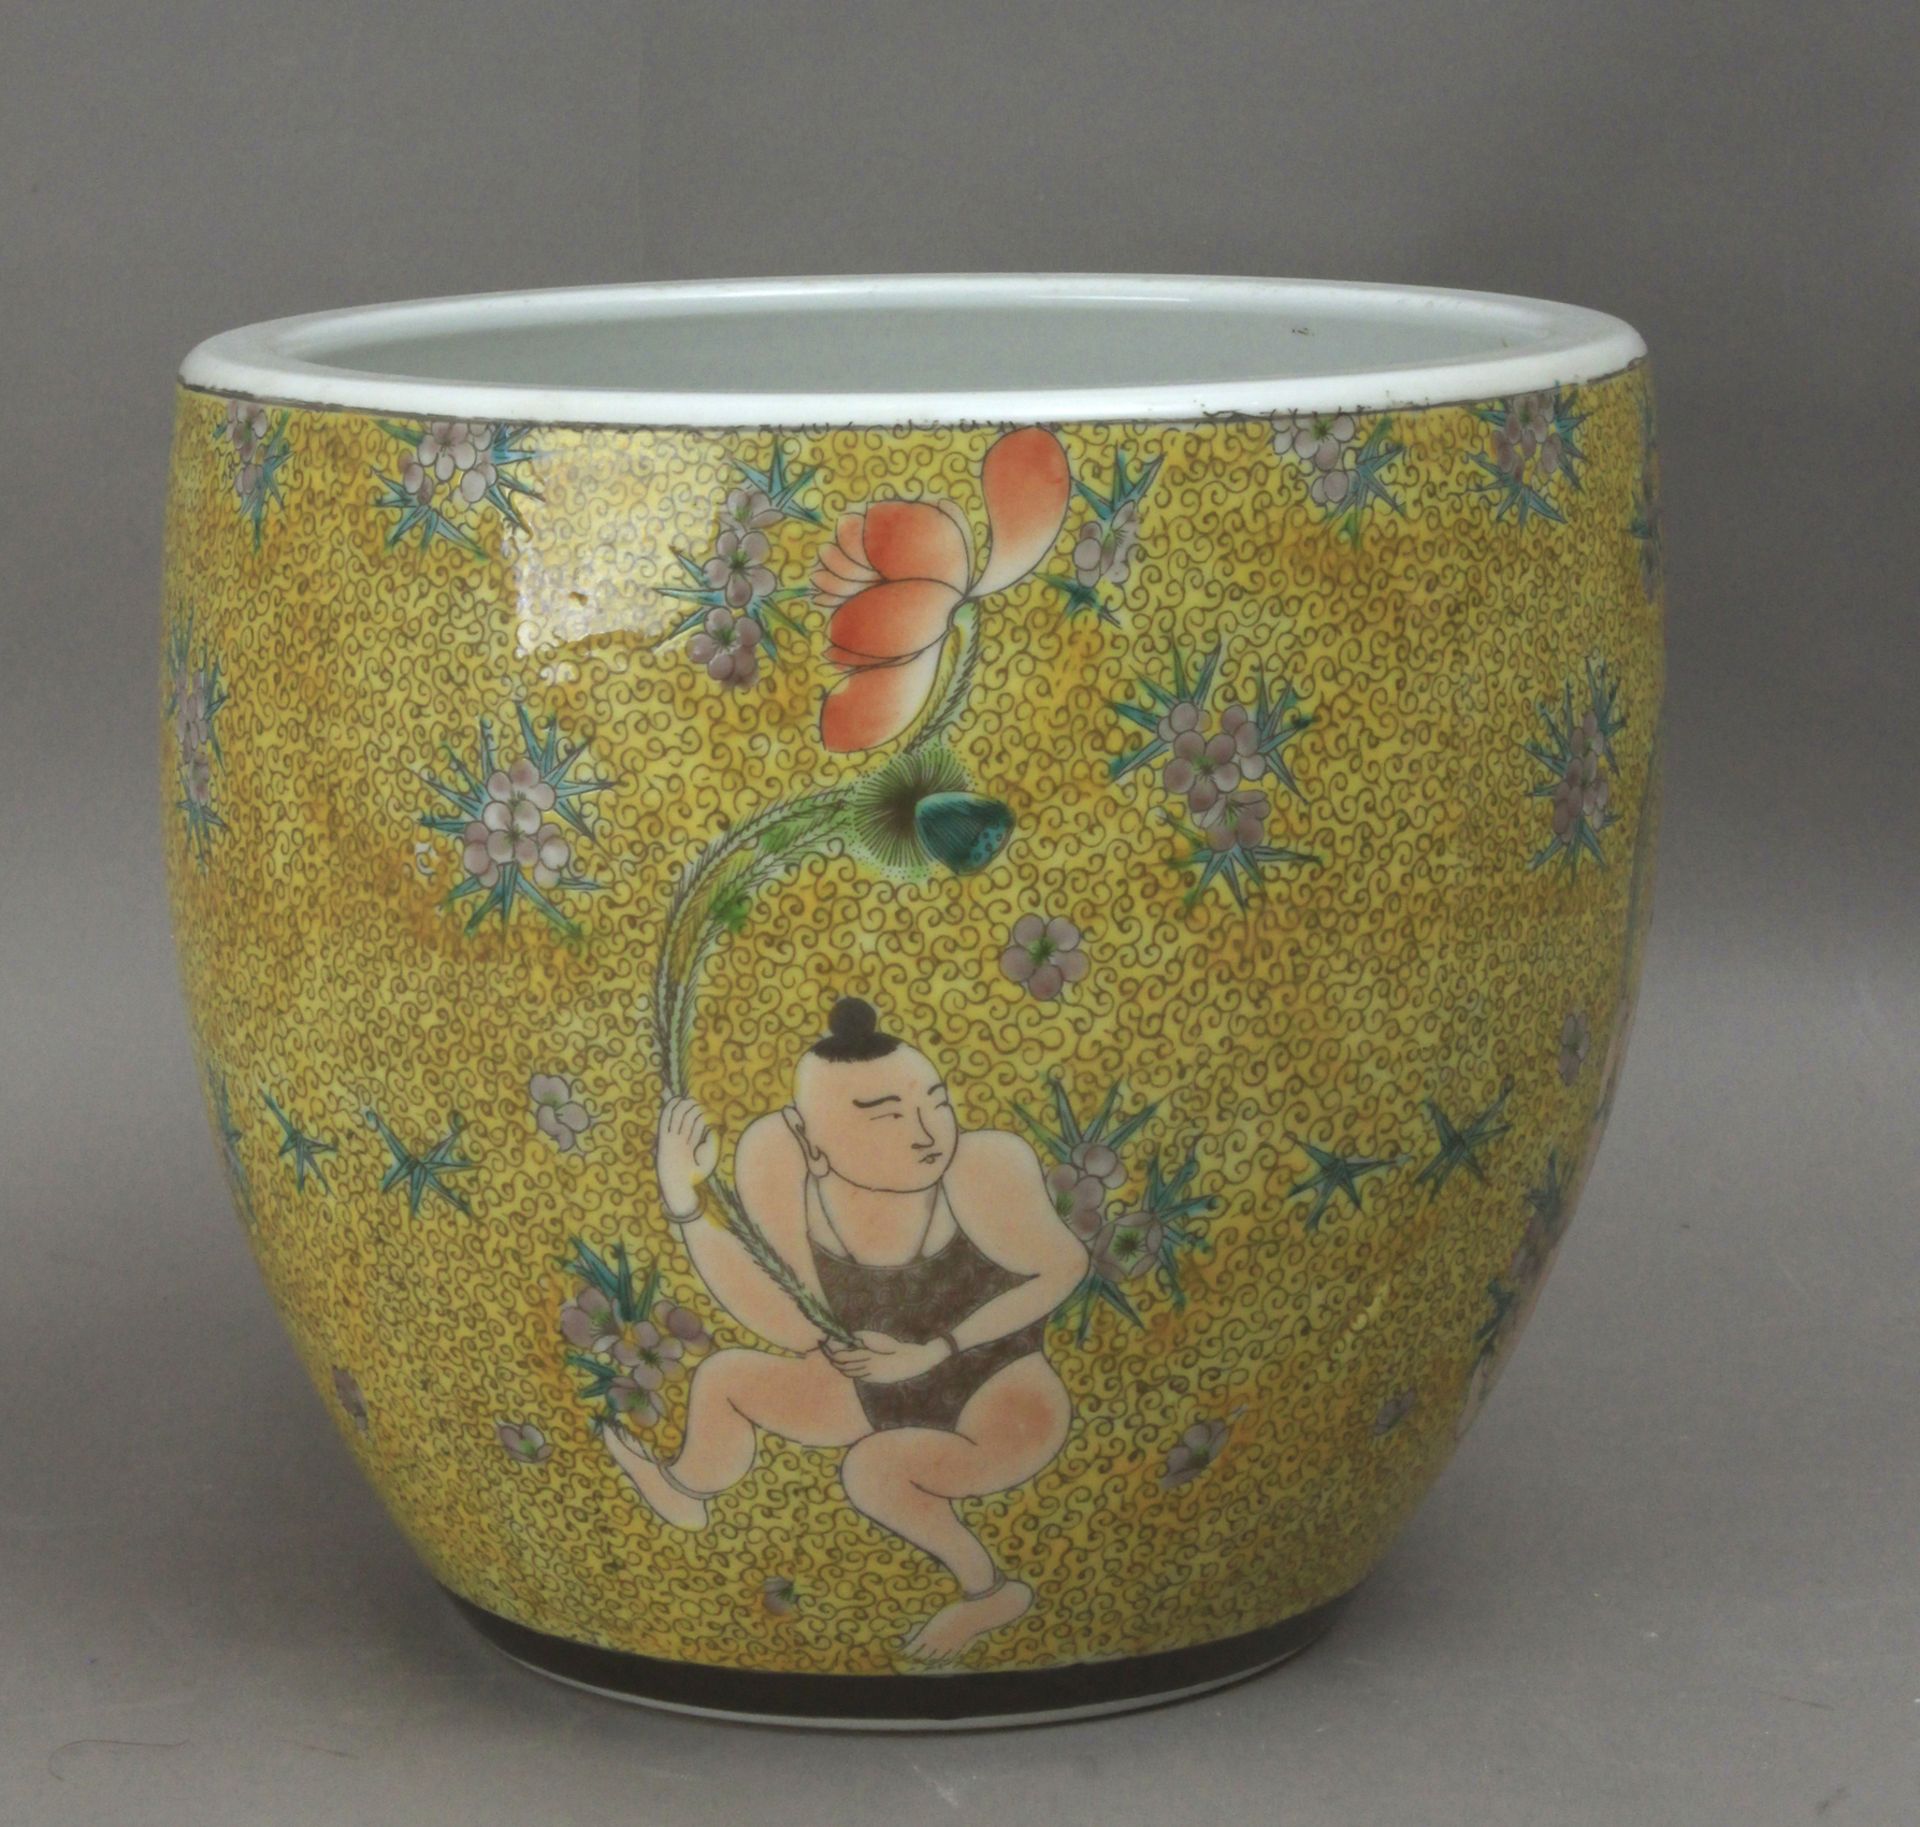 A 19th century Chinese cache pot in Famille Rose porcelain